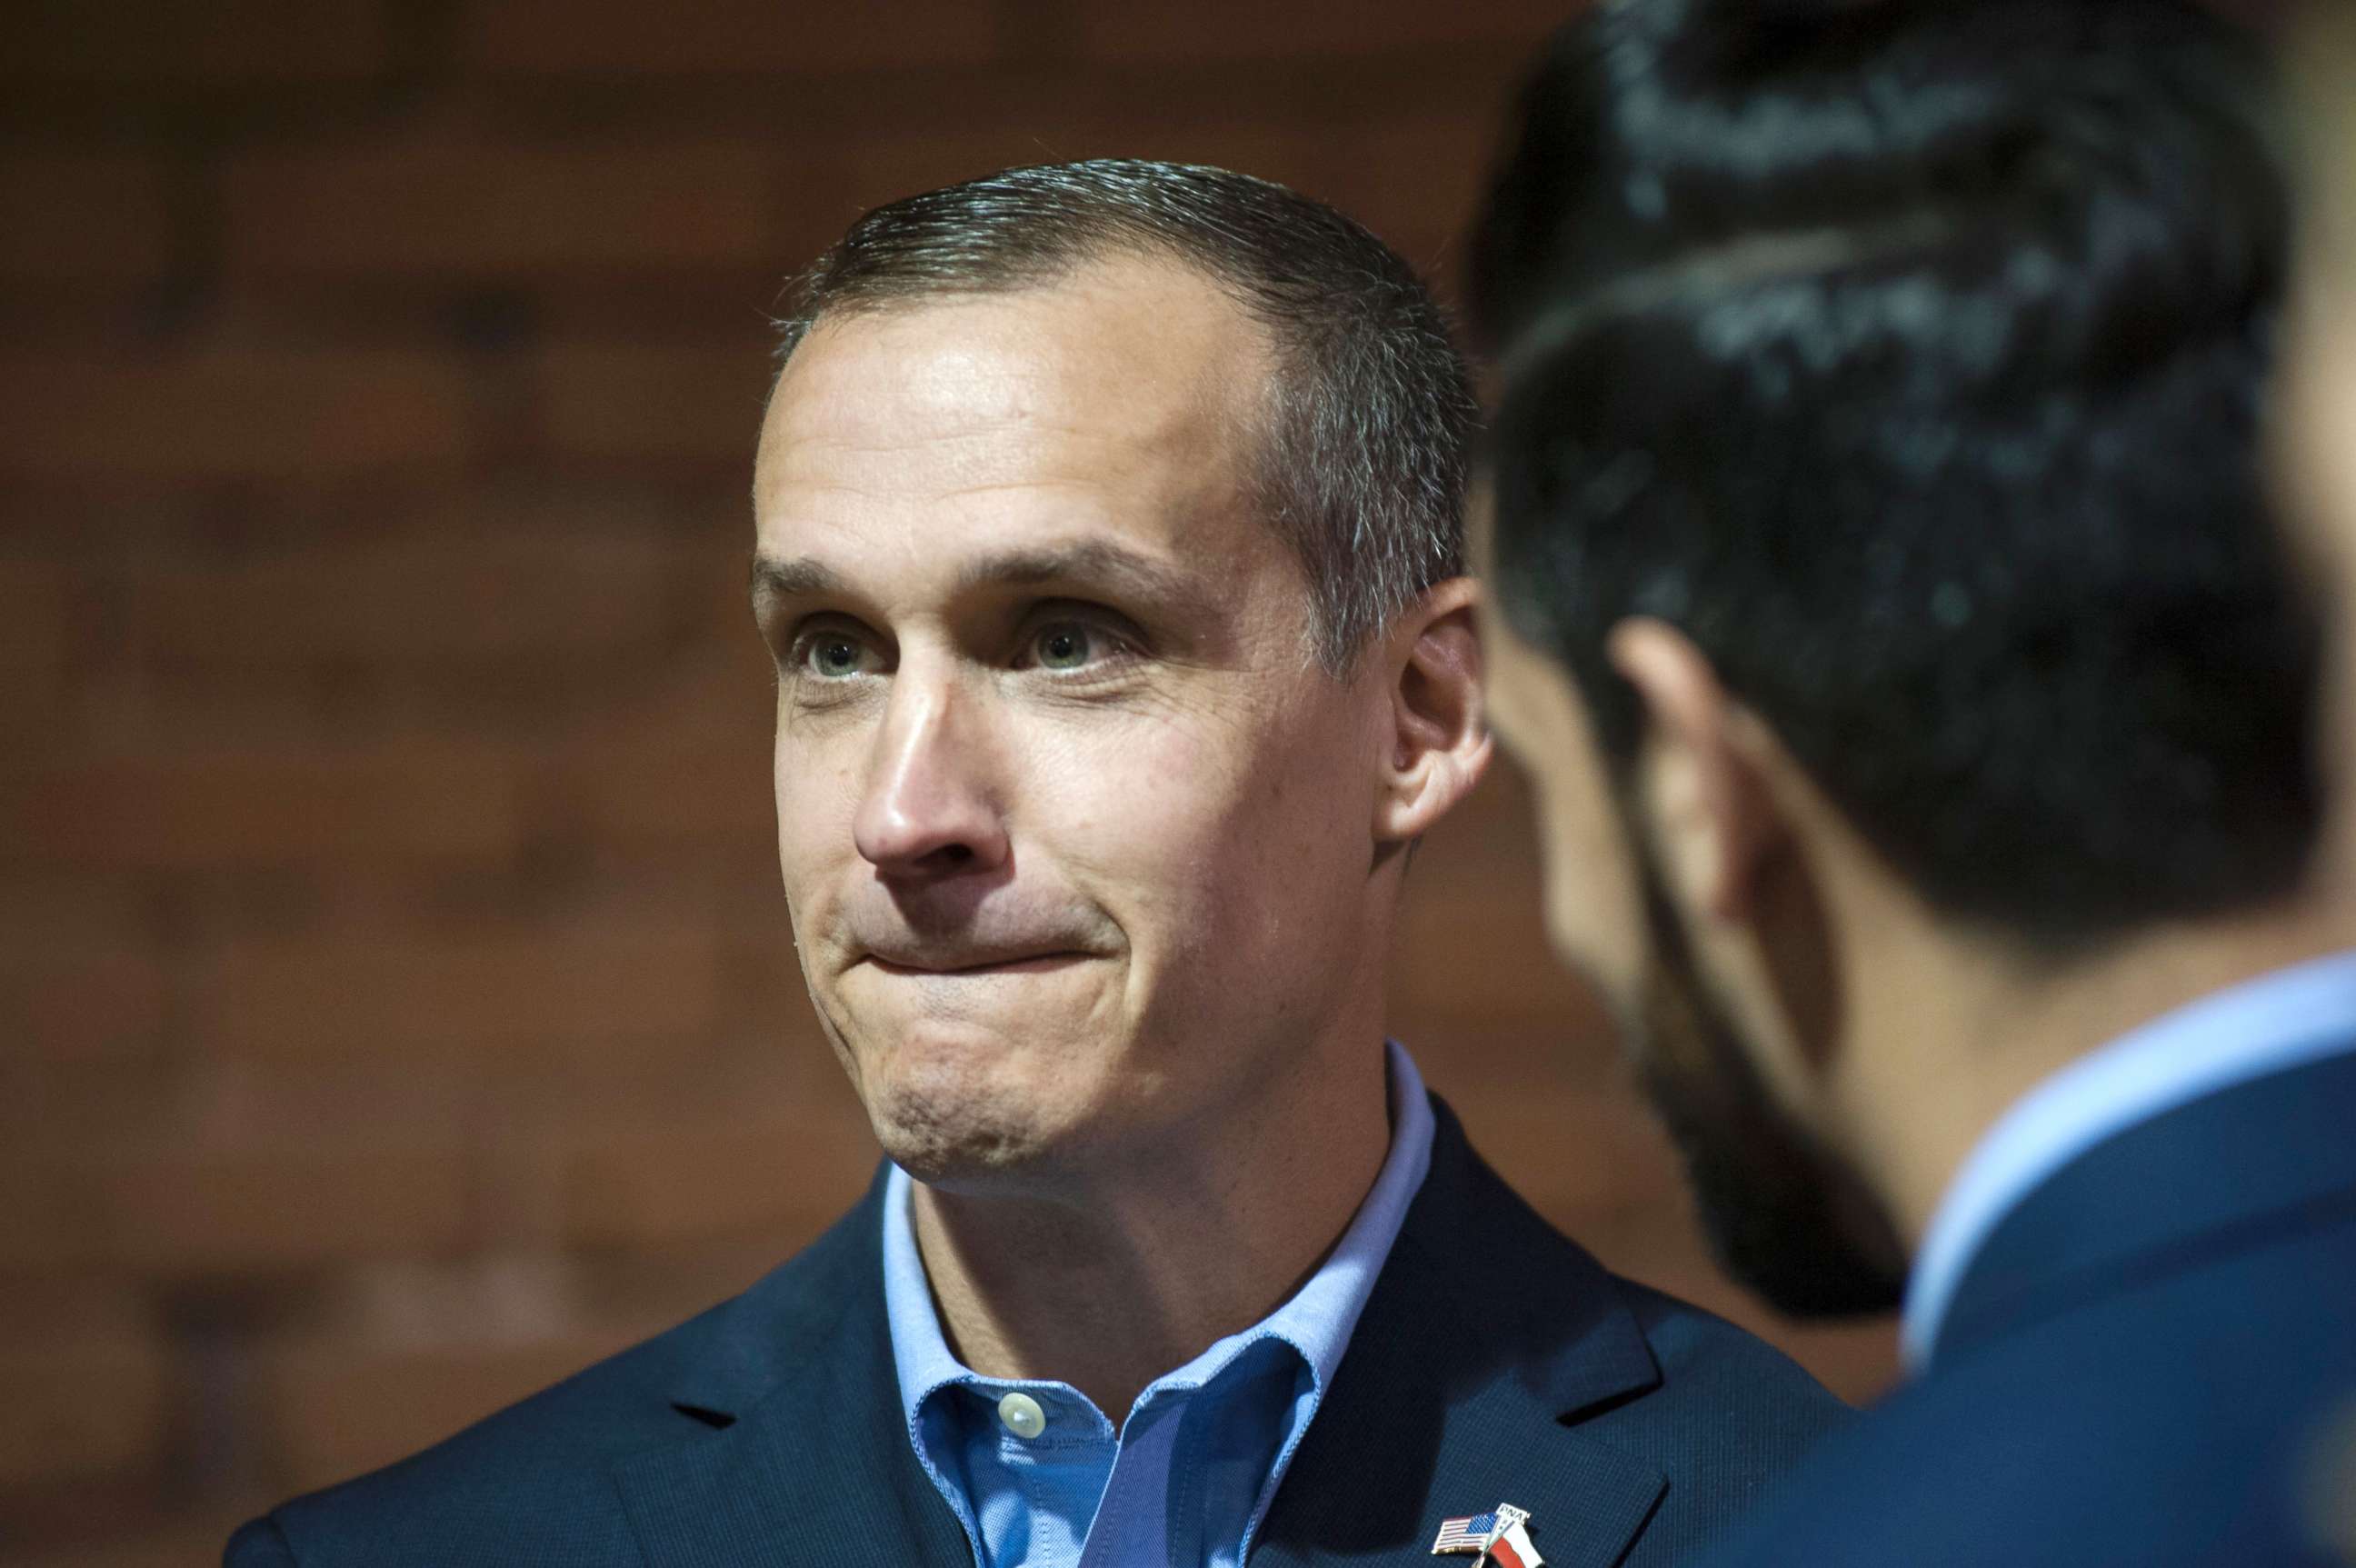 PHOTO: Former Trump Campaign Manager Corey Lewandowski attends a rally for Republican presidential nominee Donald Trump, Oct. 28, 2016, in Manchester, New Hampshire.